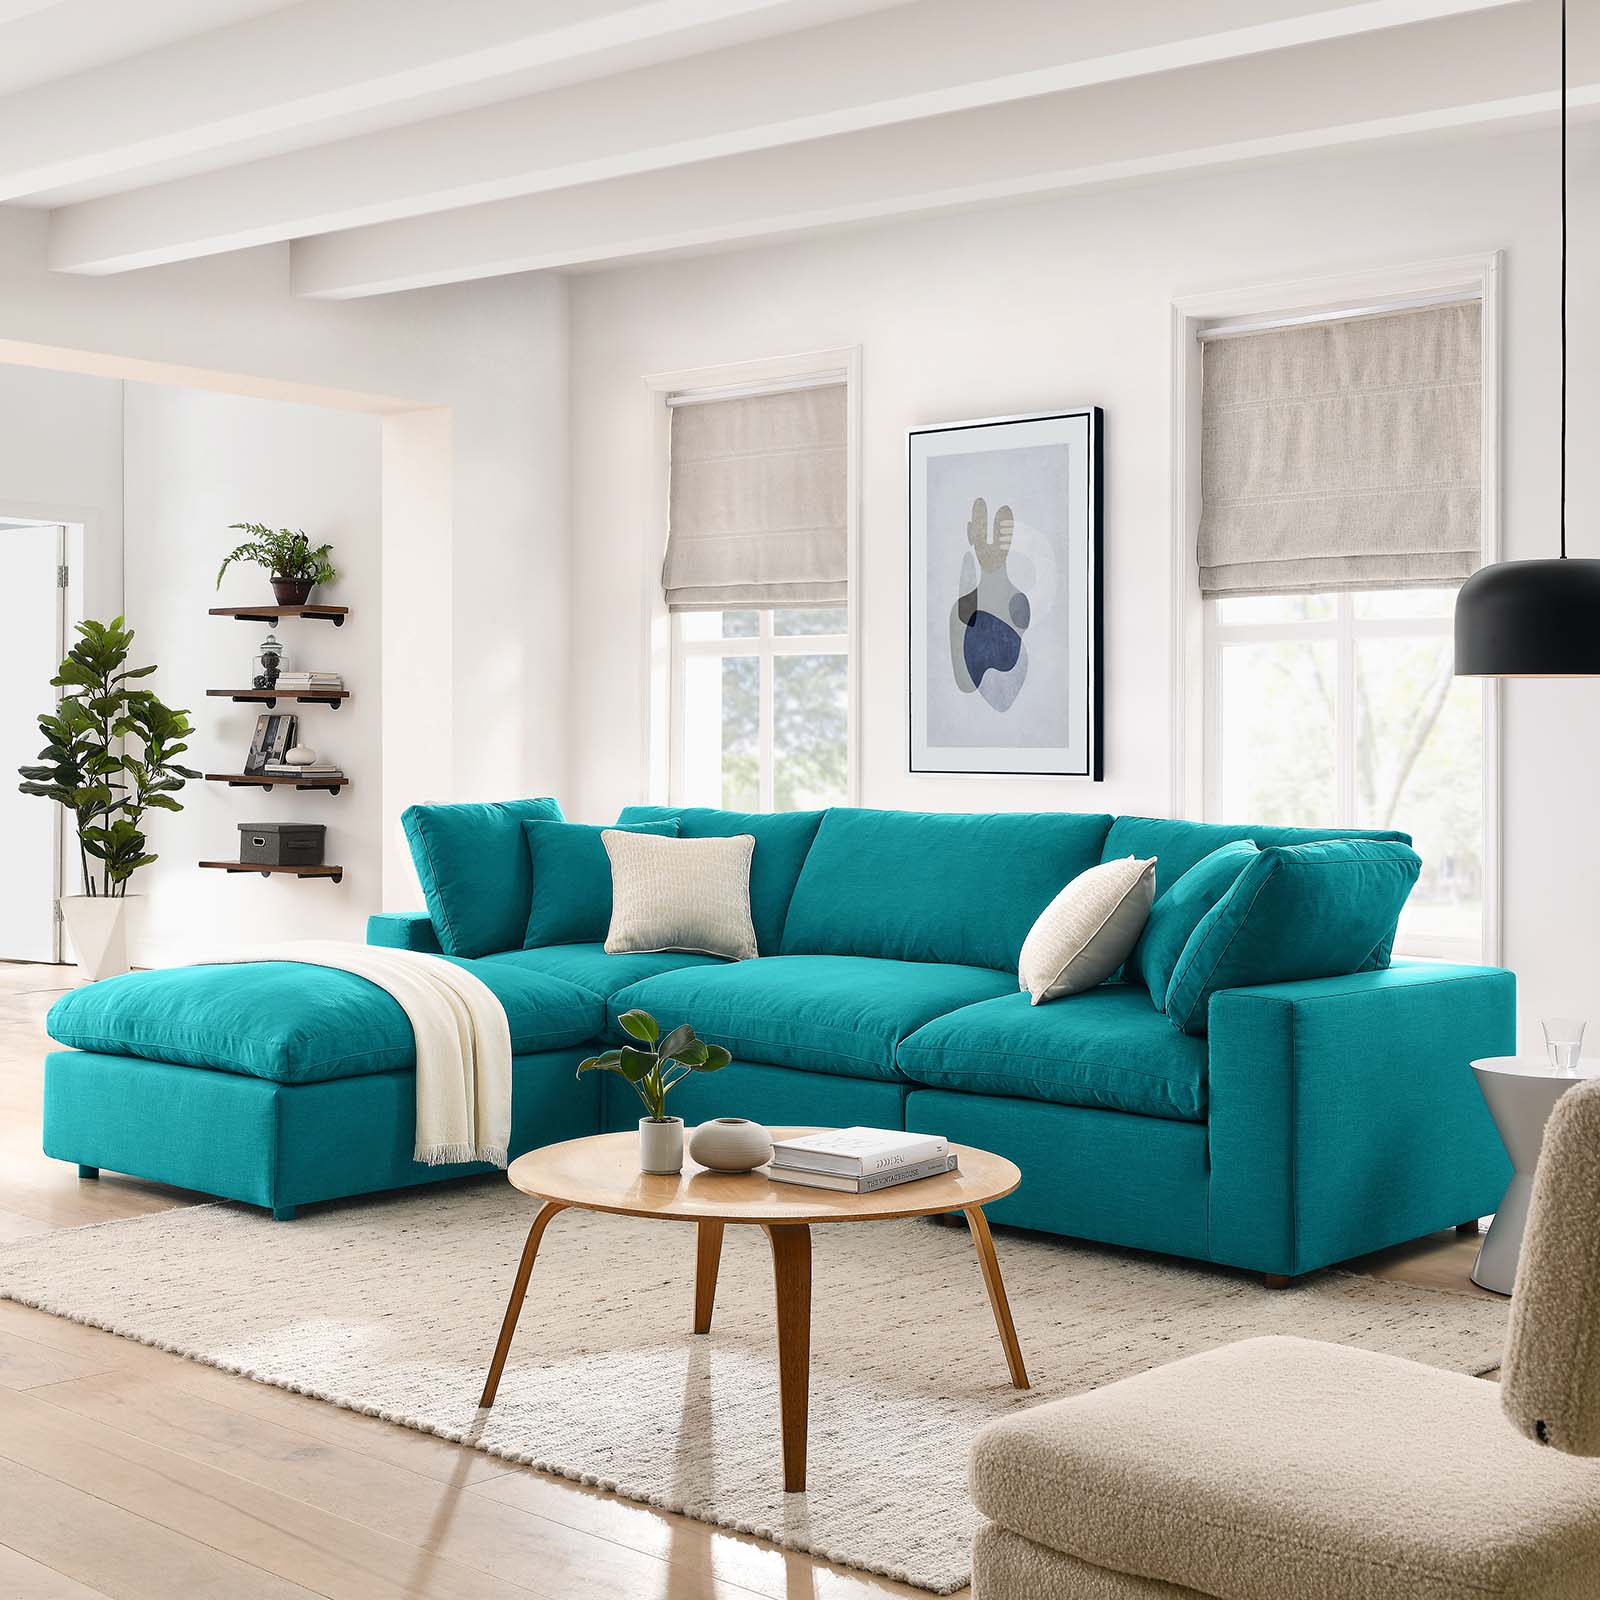 Modway Commix 4-Piece Fabric Down Filled Sectional Sofa Set in Teal - image 1 of 10